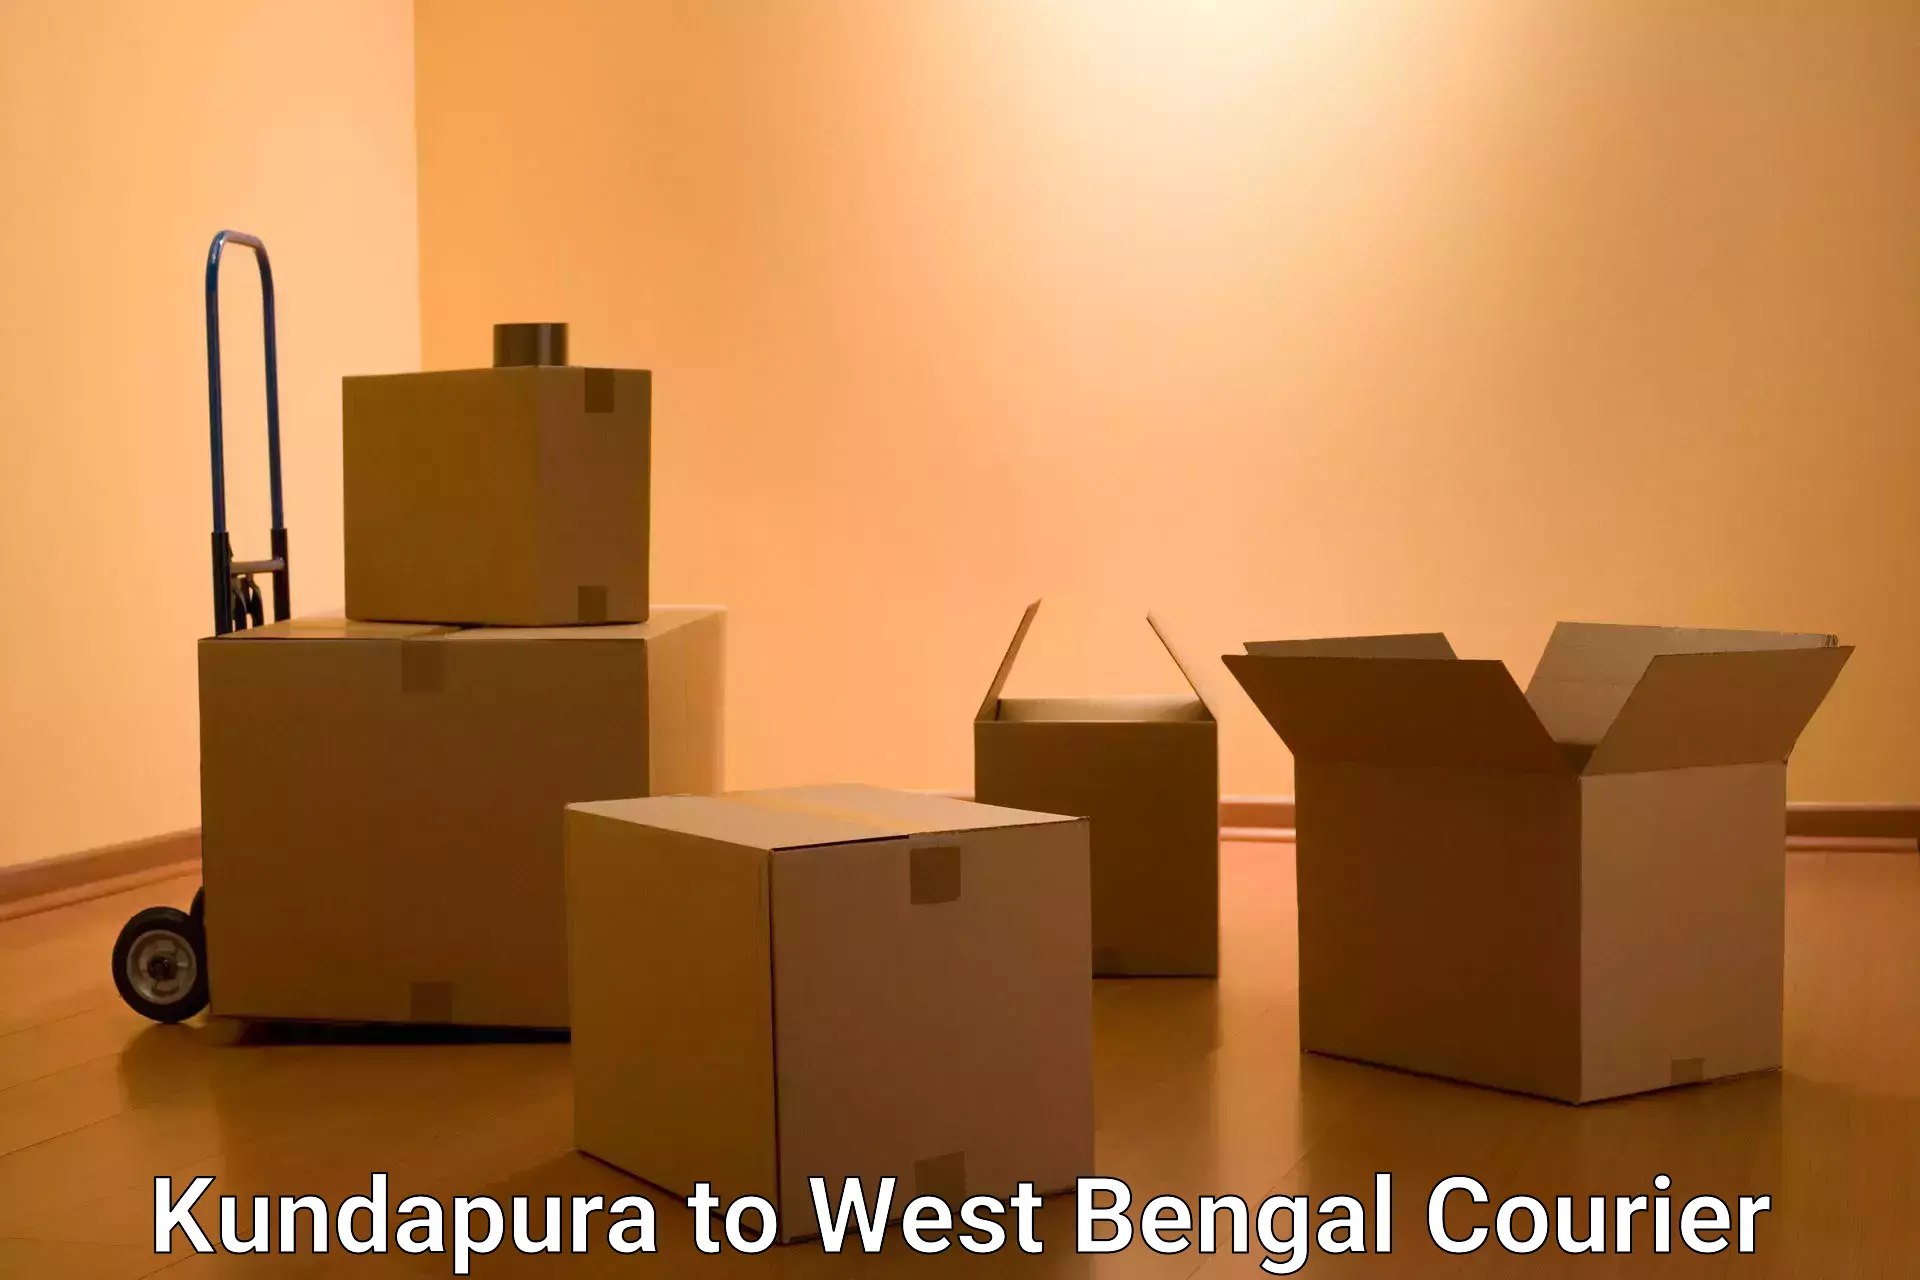 Cash on delivery service Kundapura to West Bengal